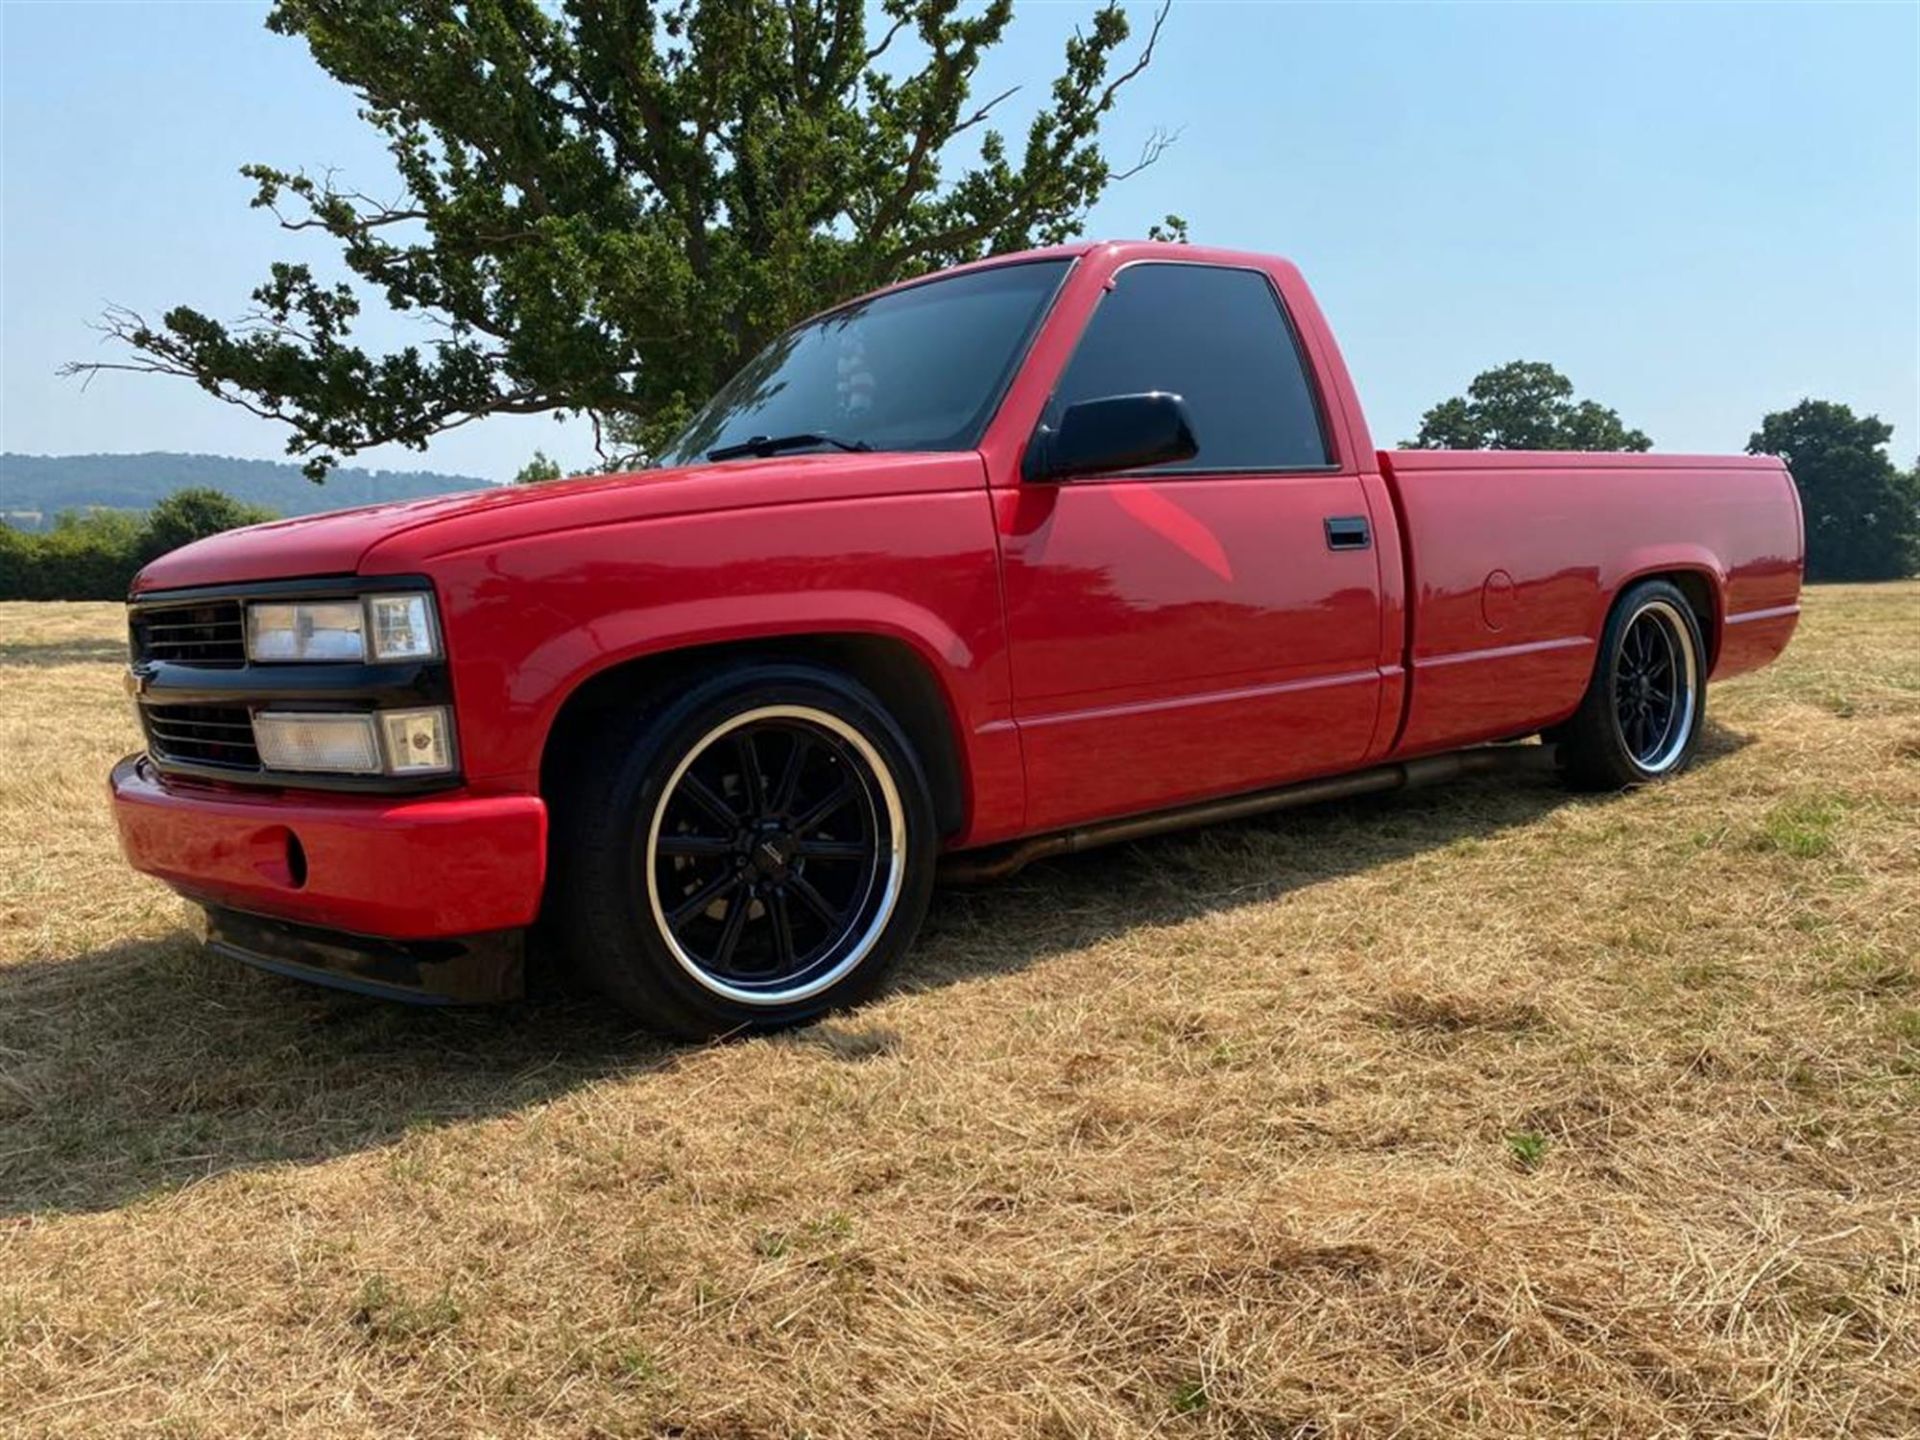 1988 Chevrolet C1500/OBS/GMT-400 Pickup - Image 5 of 10